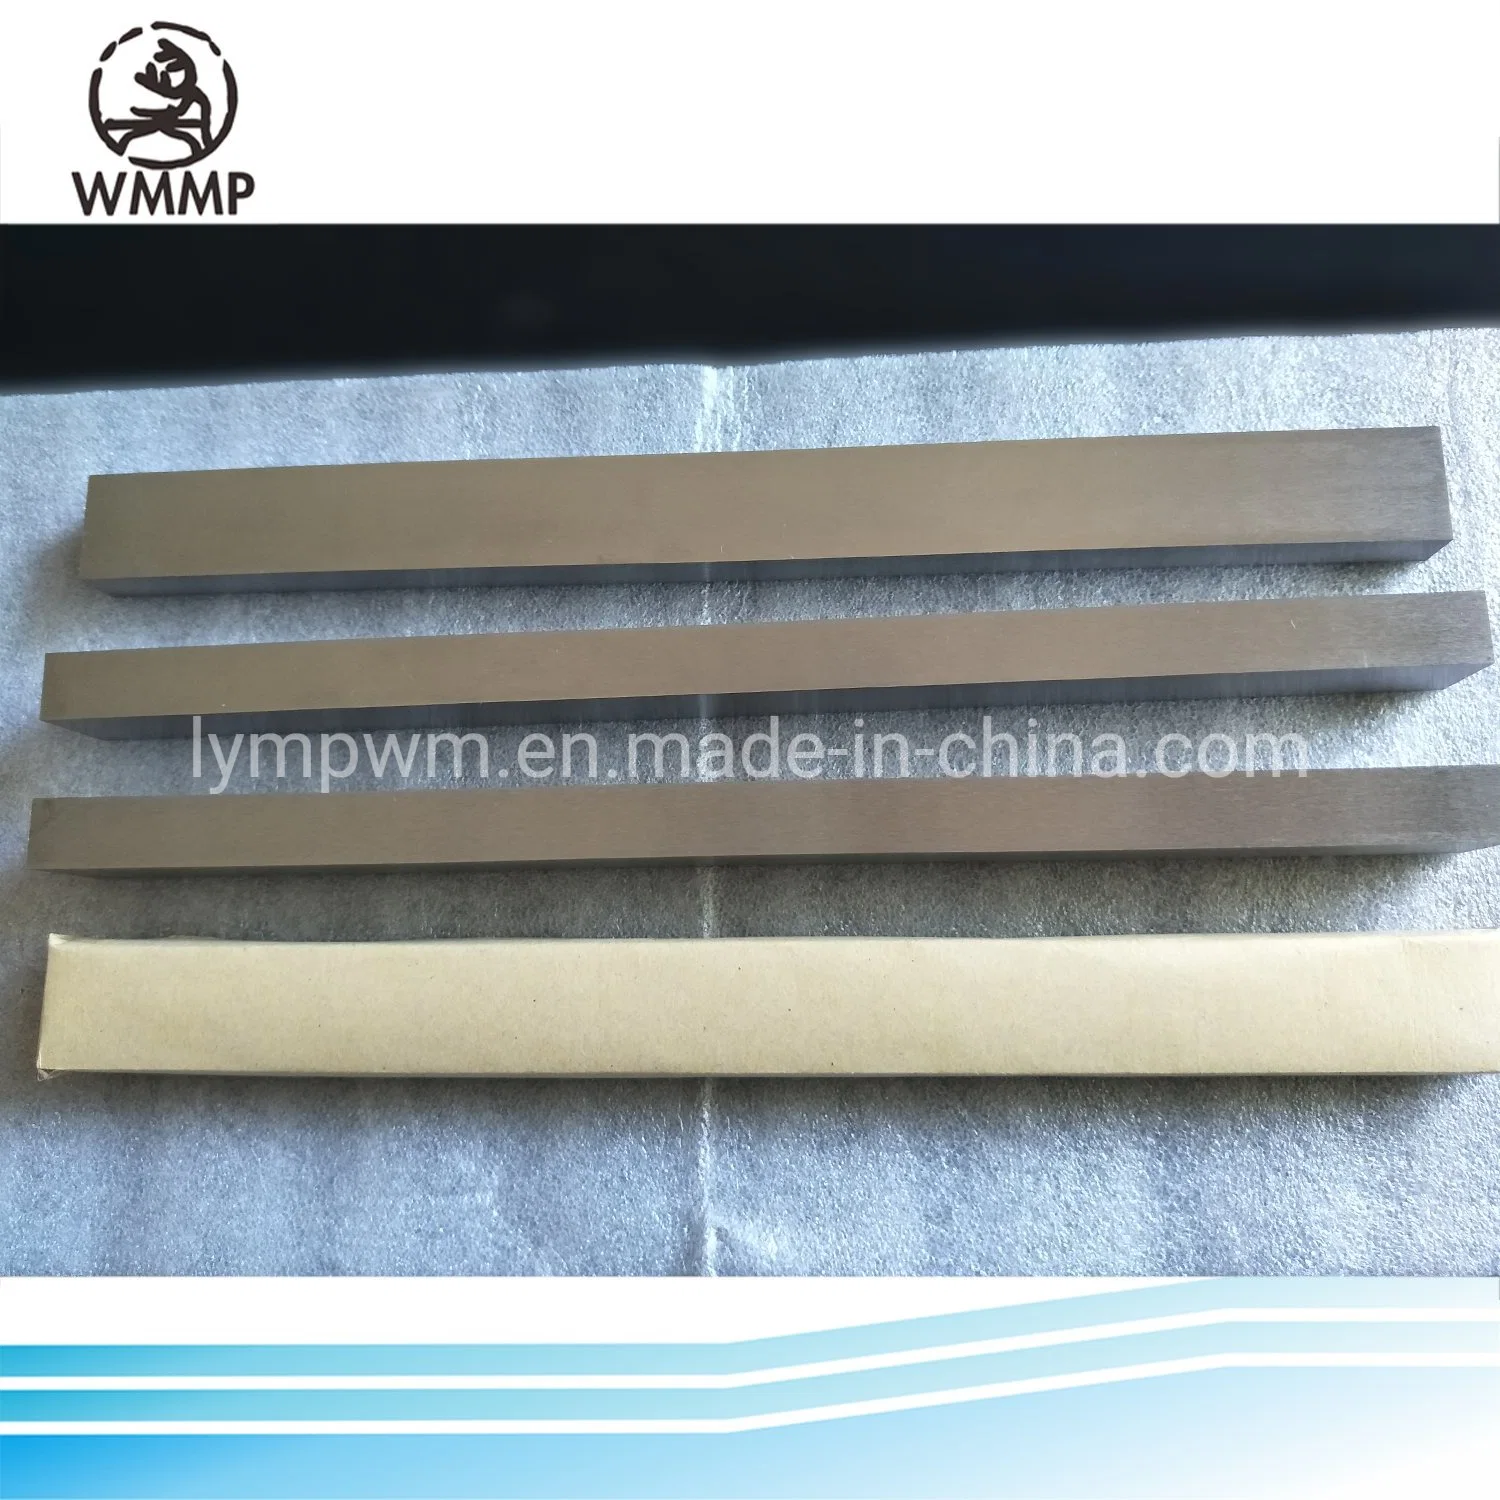 Hot Rolled Thickness1mm&2mm Molybdenum Plates&Molybdenum Alloy Plates in Industry